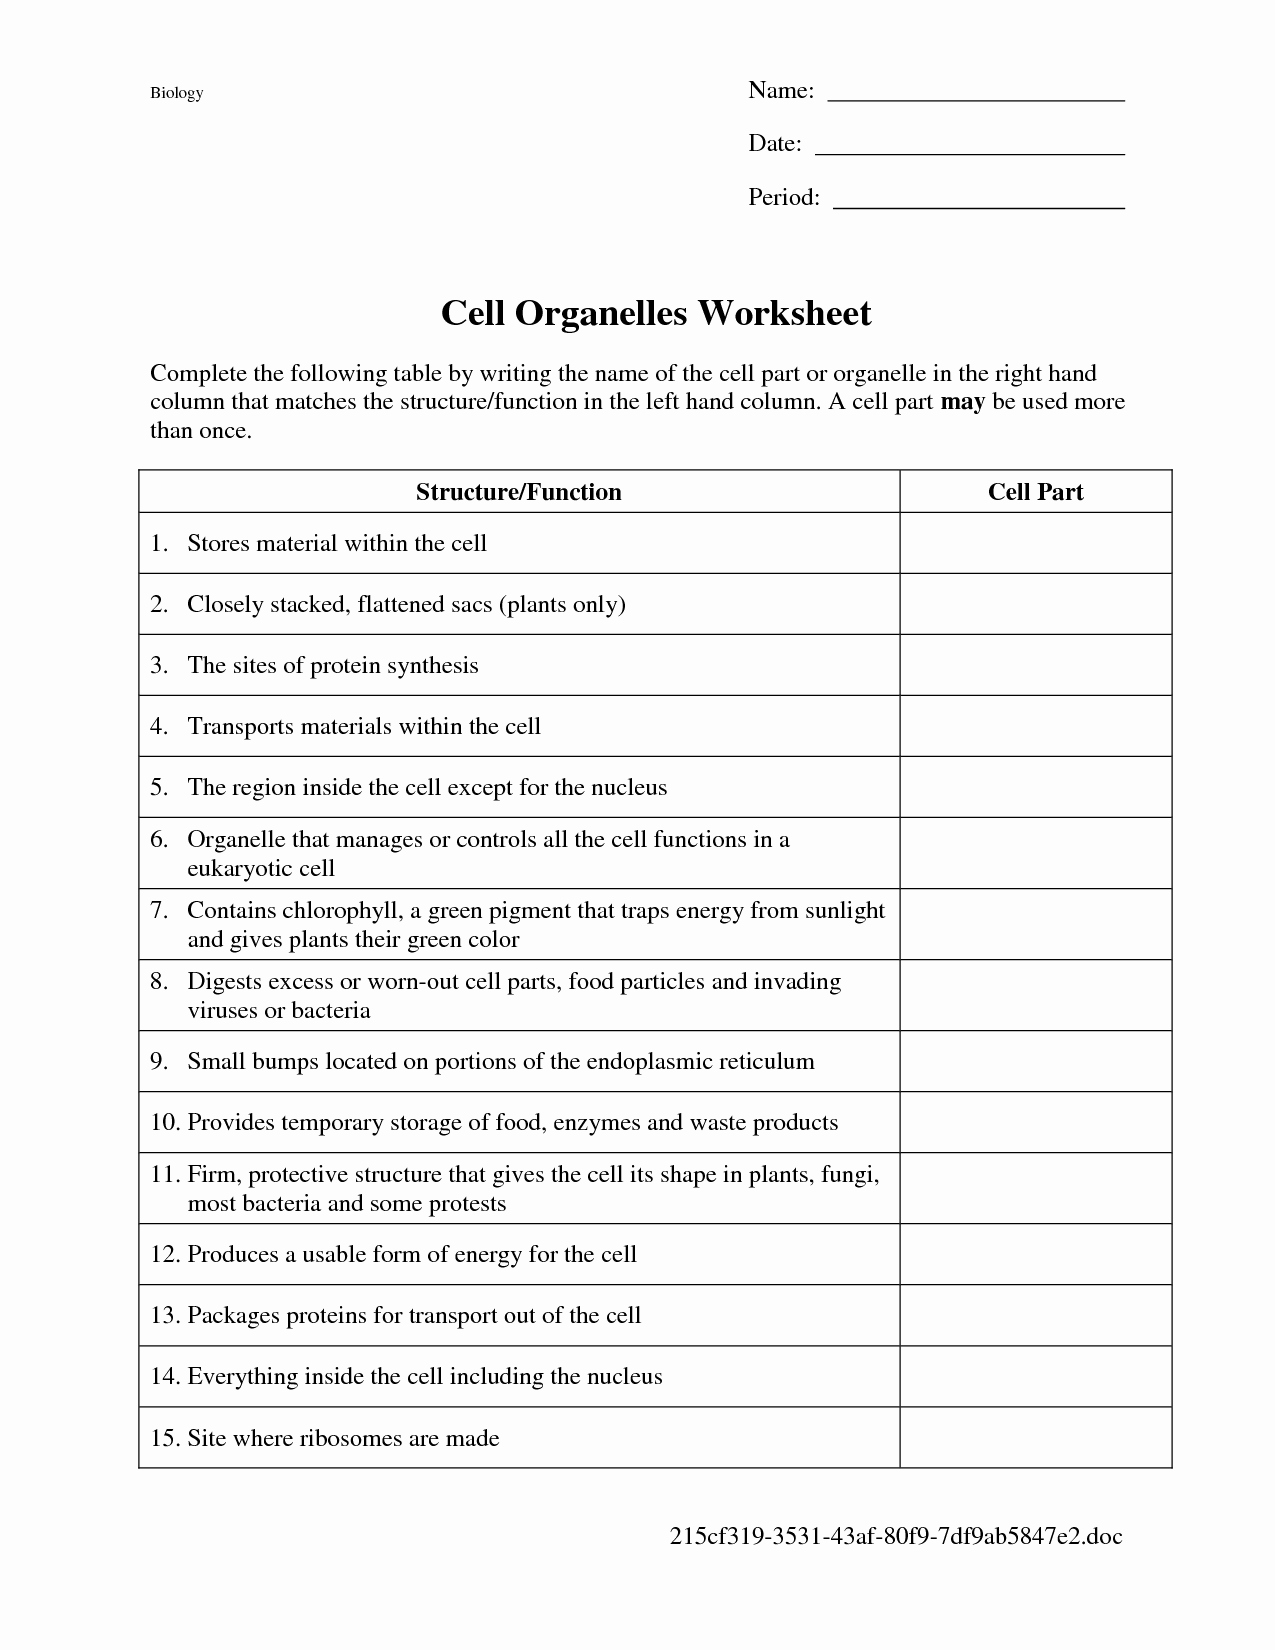 Cells and organelles Worksheet Inspirational Pin On Biology